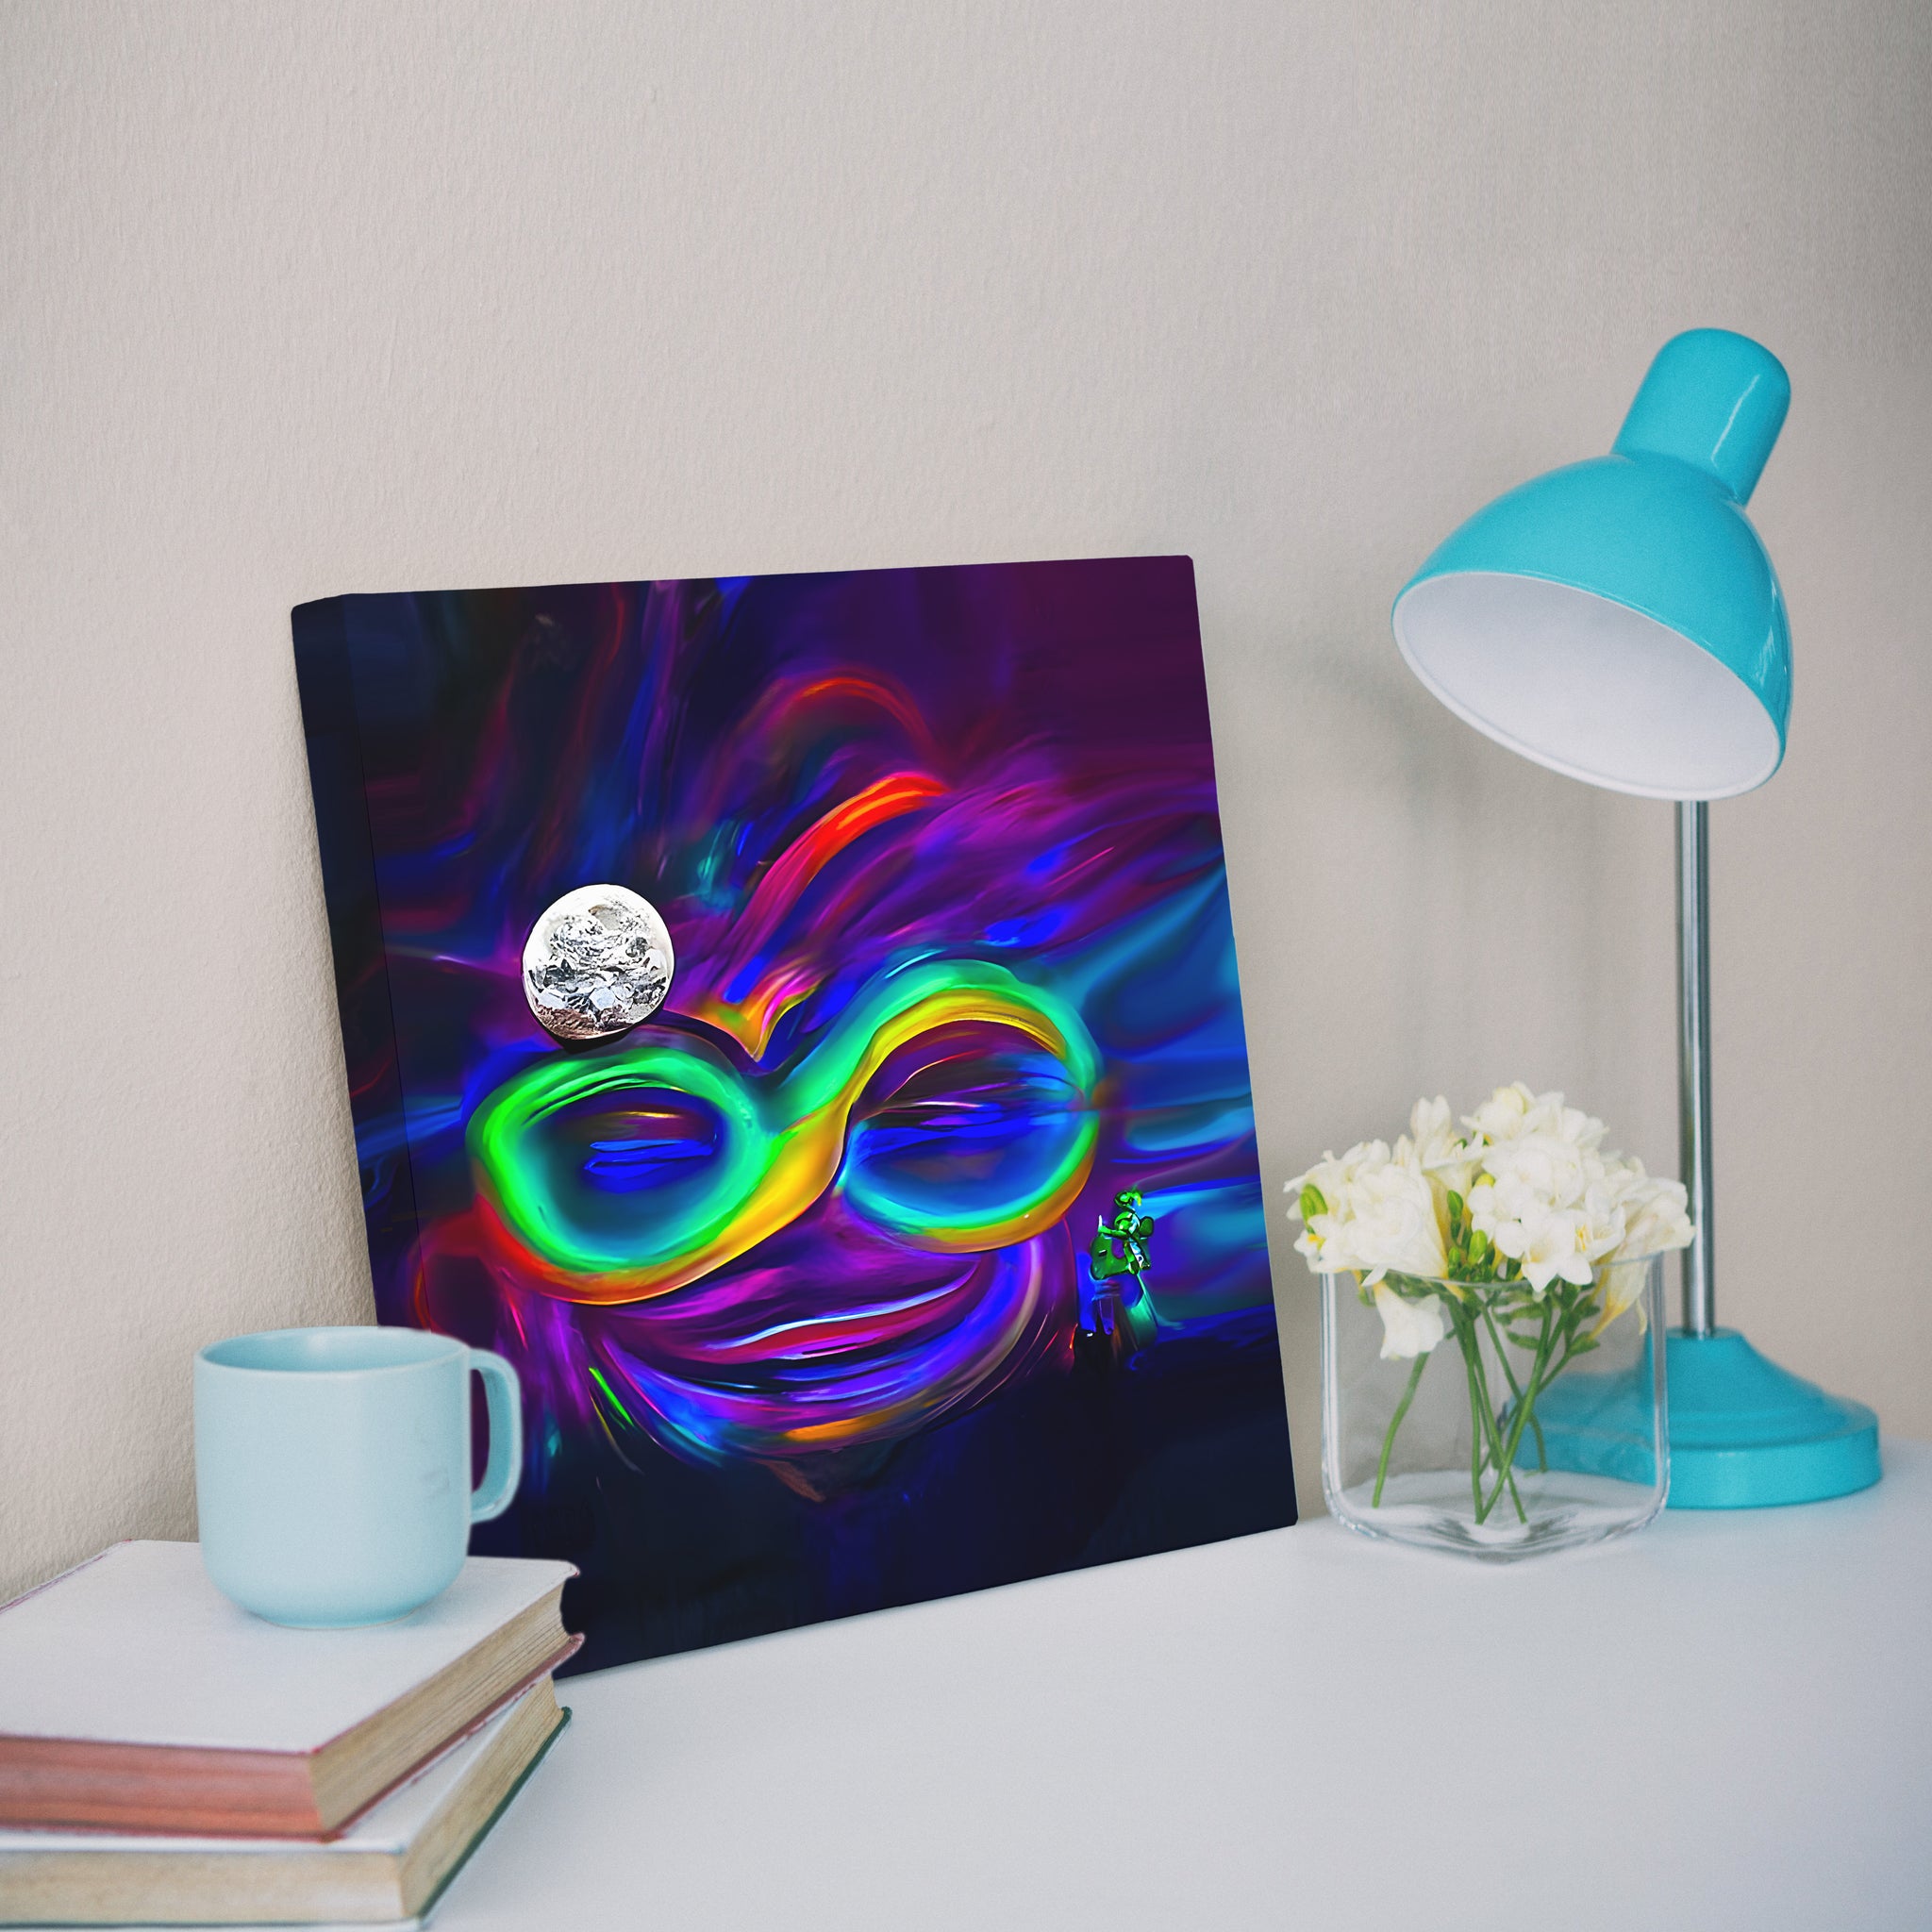 Infinity Neon Smile Stretched Canvas Poster Print Wall Decor Abstract Art Colorful Artistic Painting Digital Artwork Wall Art Moon